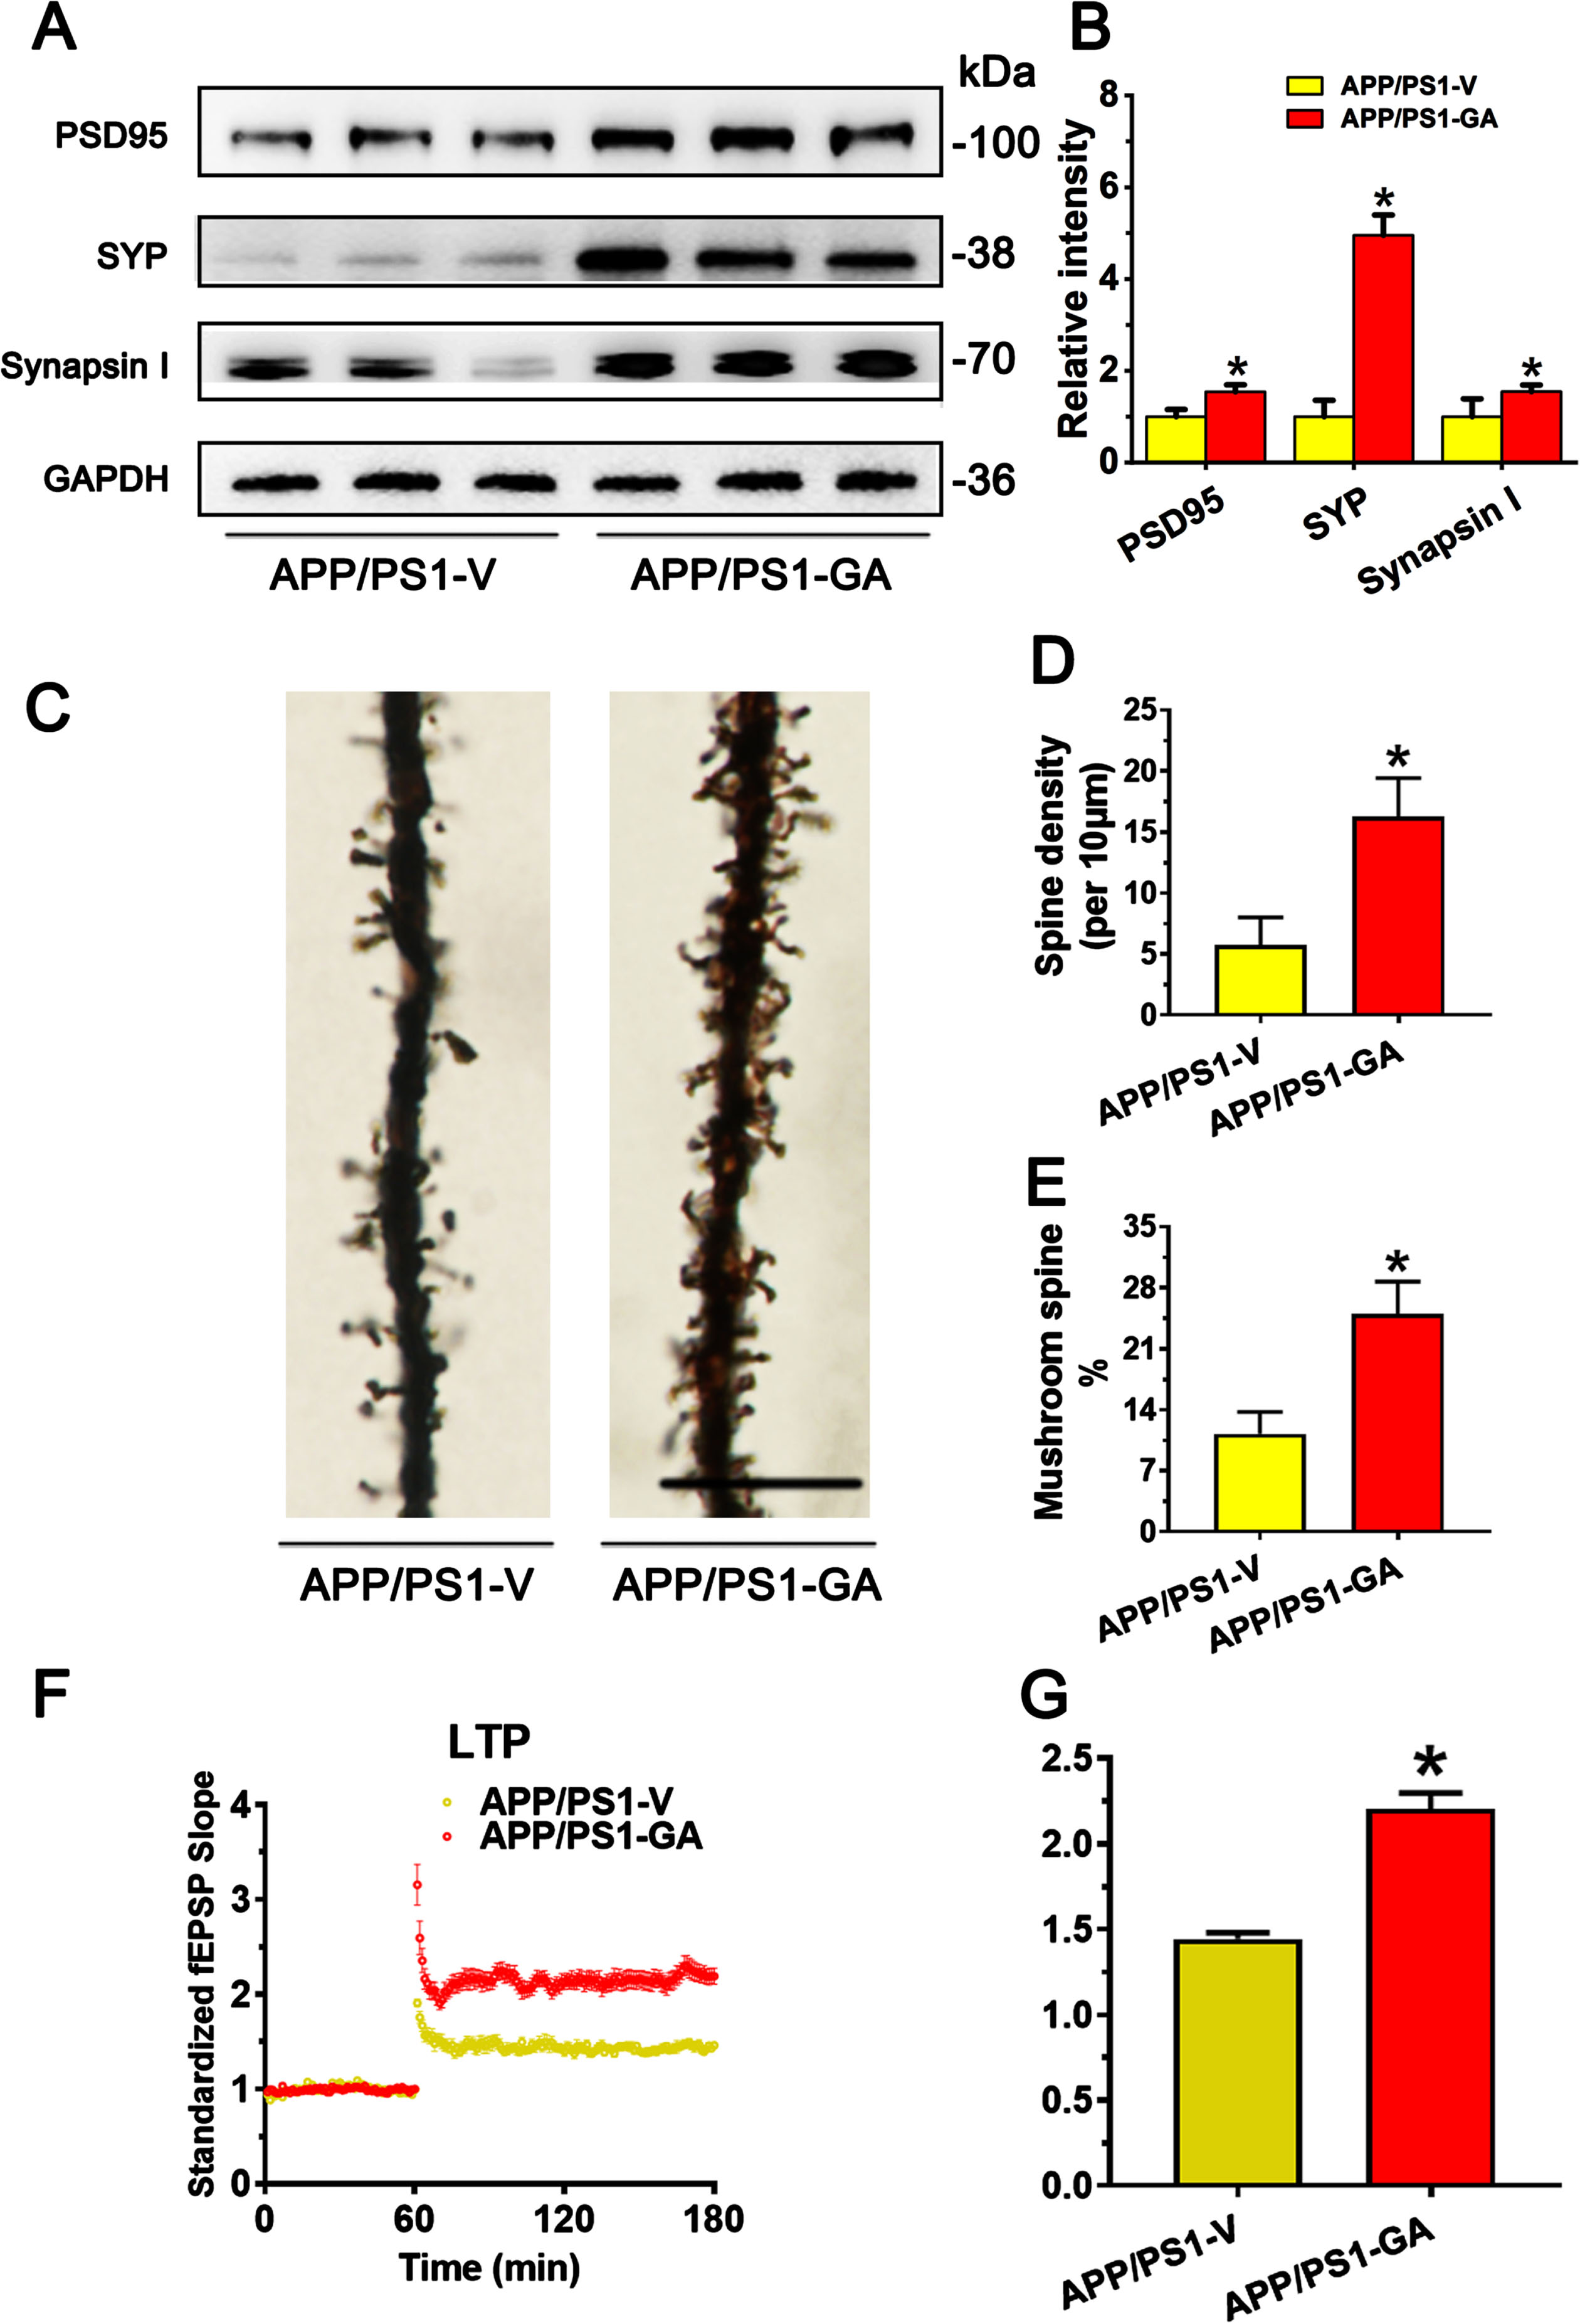 GA ameliorated synaptic impairment and improved synaptic plasticity. A, B) The protein levels of synapse were assayed by western blotting in the mouse brains of APP/PS1 after GA administration with quantitative analysis. [PSD95] Unpaired t-test, t = 3.221 df = 8, p = 0.0218; [SYP] Unpaired t-test, t = 3.904 df = 8, p = 0.0101; [Synapsin I] Unpaired t-test, t = 3.352 df = 8, p = 0.0213, n = 5 in each group. C-E) The spine number (D) and shape (E) were examined by Golgi-cox staining in the mouse brains of APP/PS1 mice after GA administration with quantitative analysis. [D] Unpaired t-test, t = 2.700 df = 8, p = 0.0356; [E] Unpaired t-test, t = 2.904 df = 8, p = 0.0204, n = 5 in each group. F, G) Synaptic plasticity was detected in the brain slice of APP/PS1 after GA administration. Unpaired t-test, t = 4.353 df = 8, p = 0.0102, n = 5 in each group. *p < 0.05. Data are presented as mean±SD.